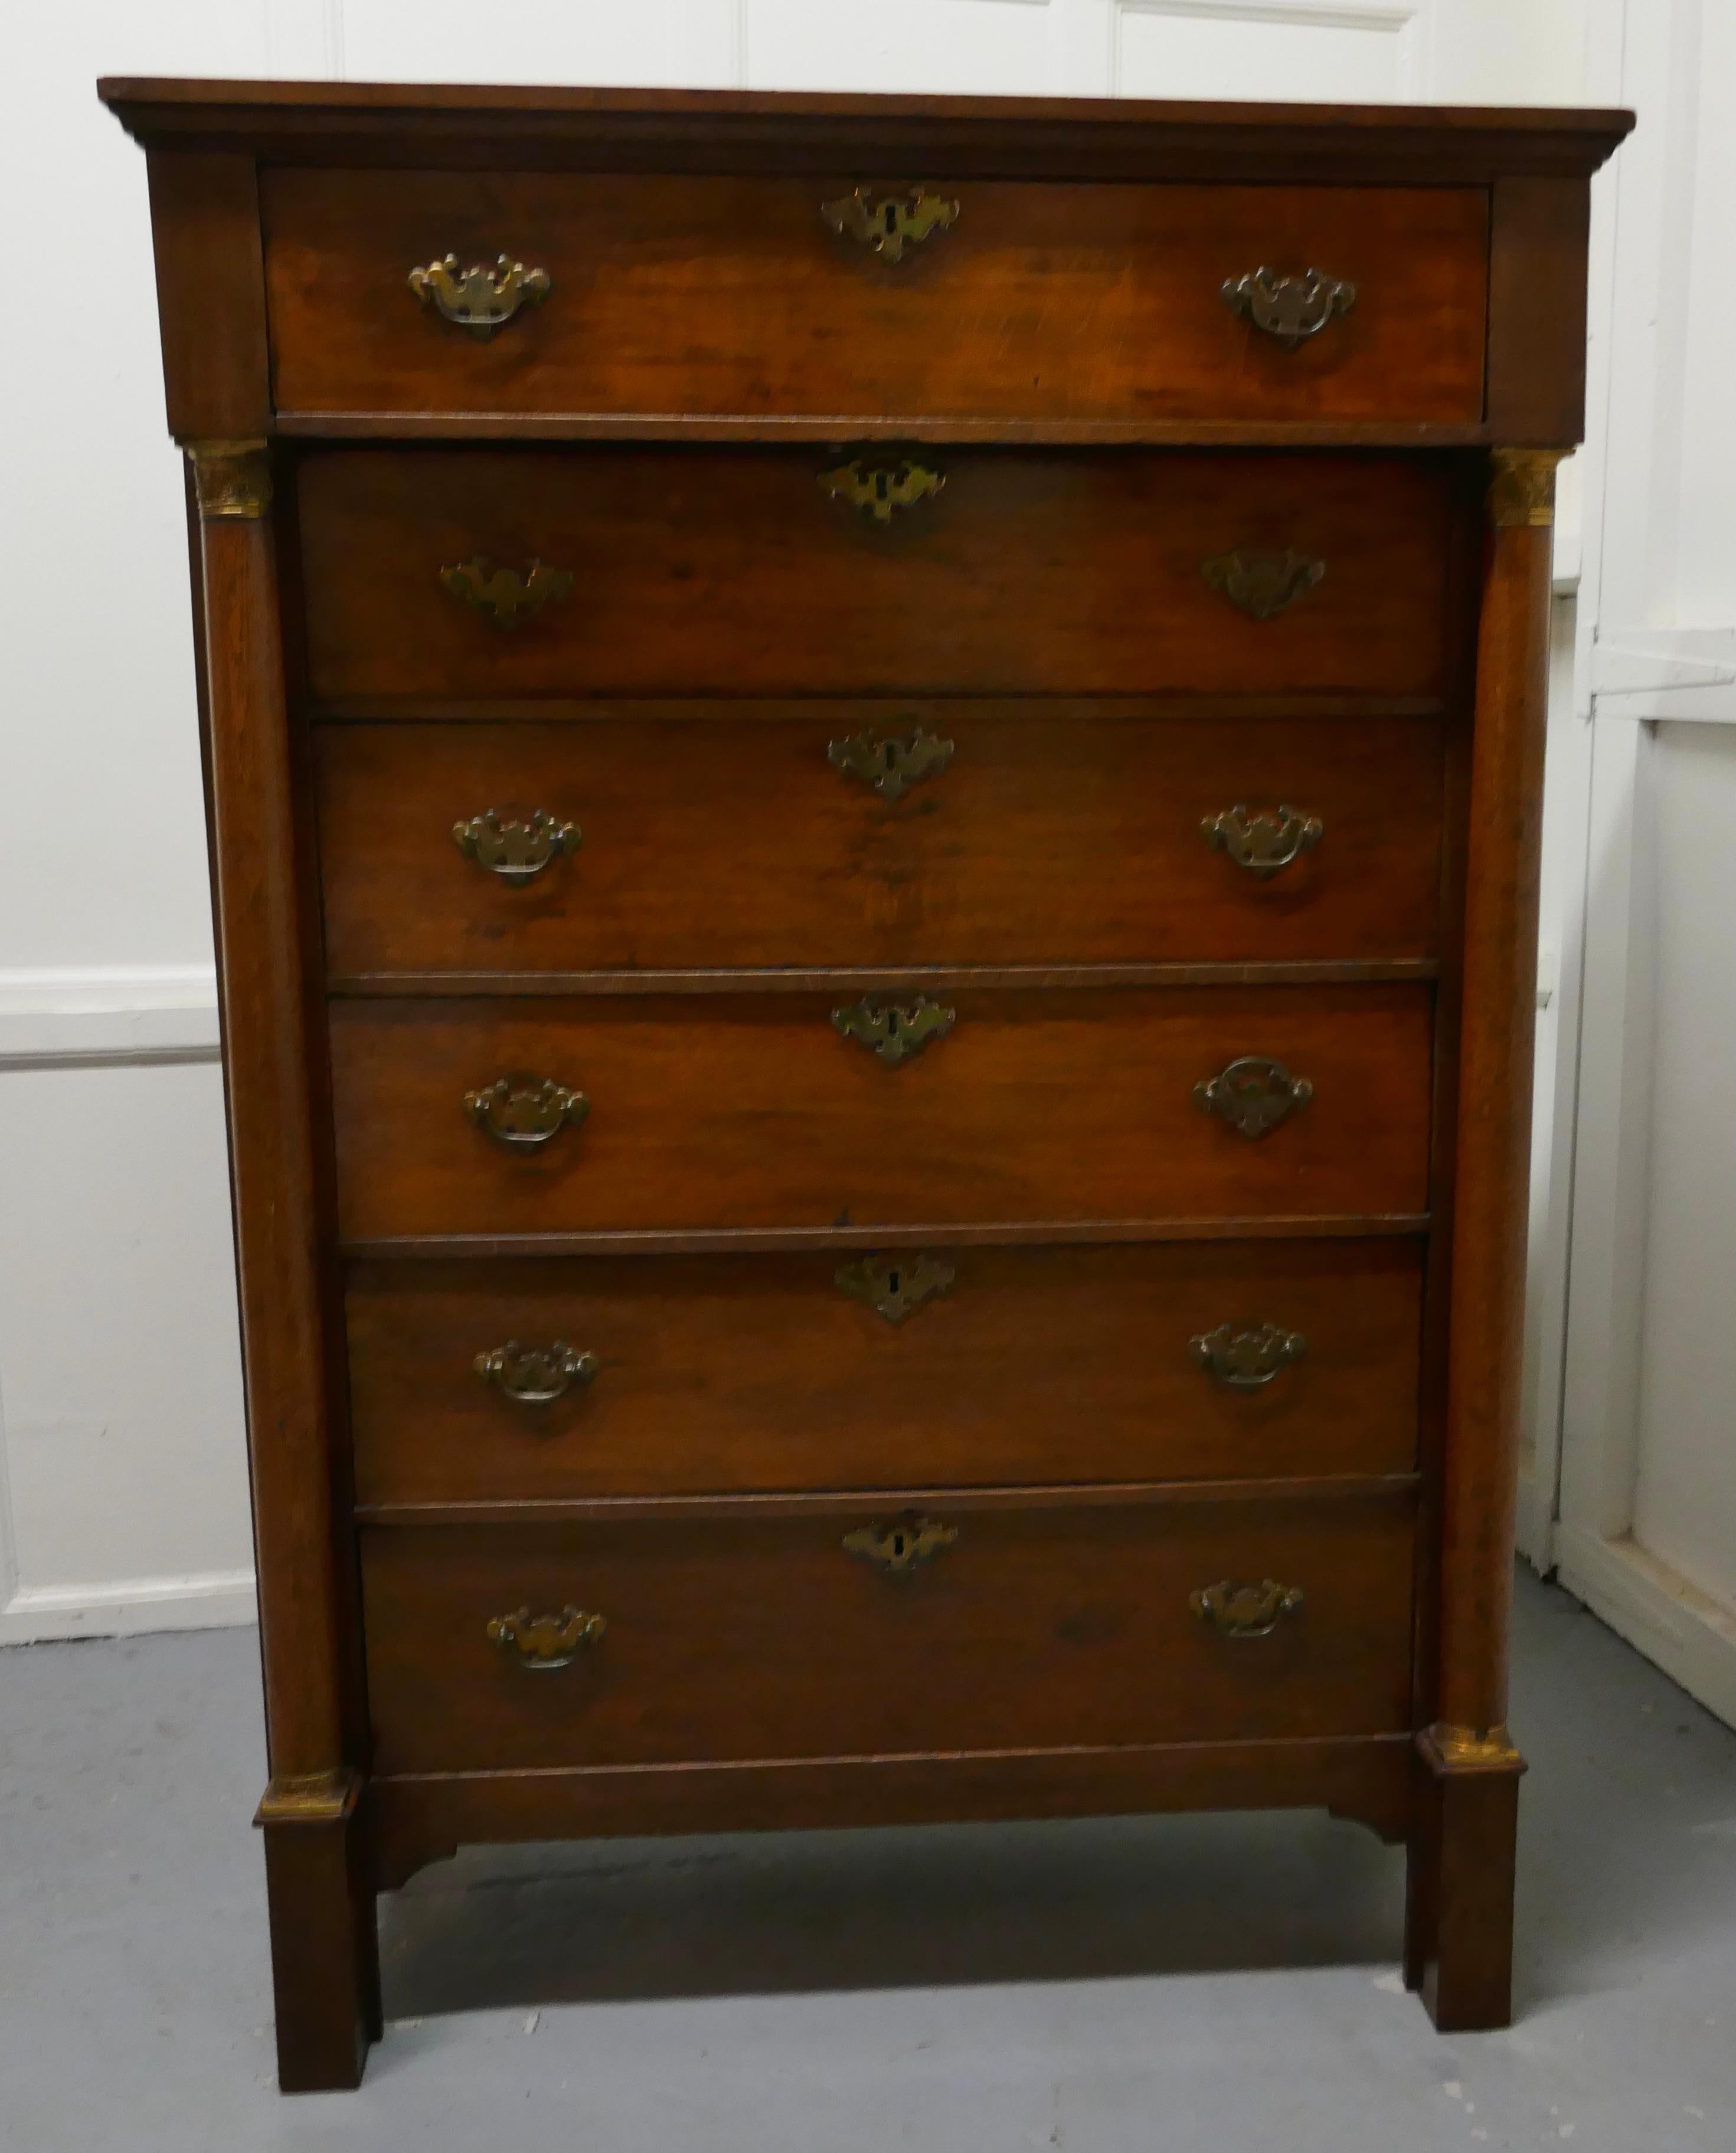 19th Century Tall 6 Drawer Oak Chest of Drawers 

This is a Superb Oak Chest of Drawers it is unusual and a very desirable style of 6 full width drawers
The chest has slender columns on each side set with ormolu mounts 
The drawers have brass swan